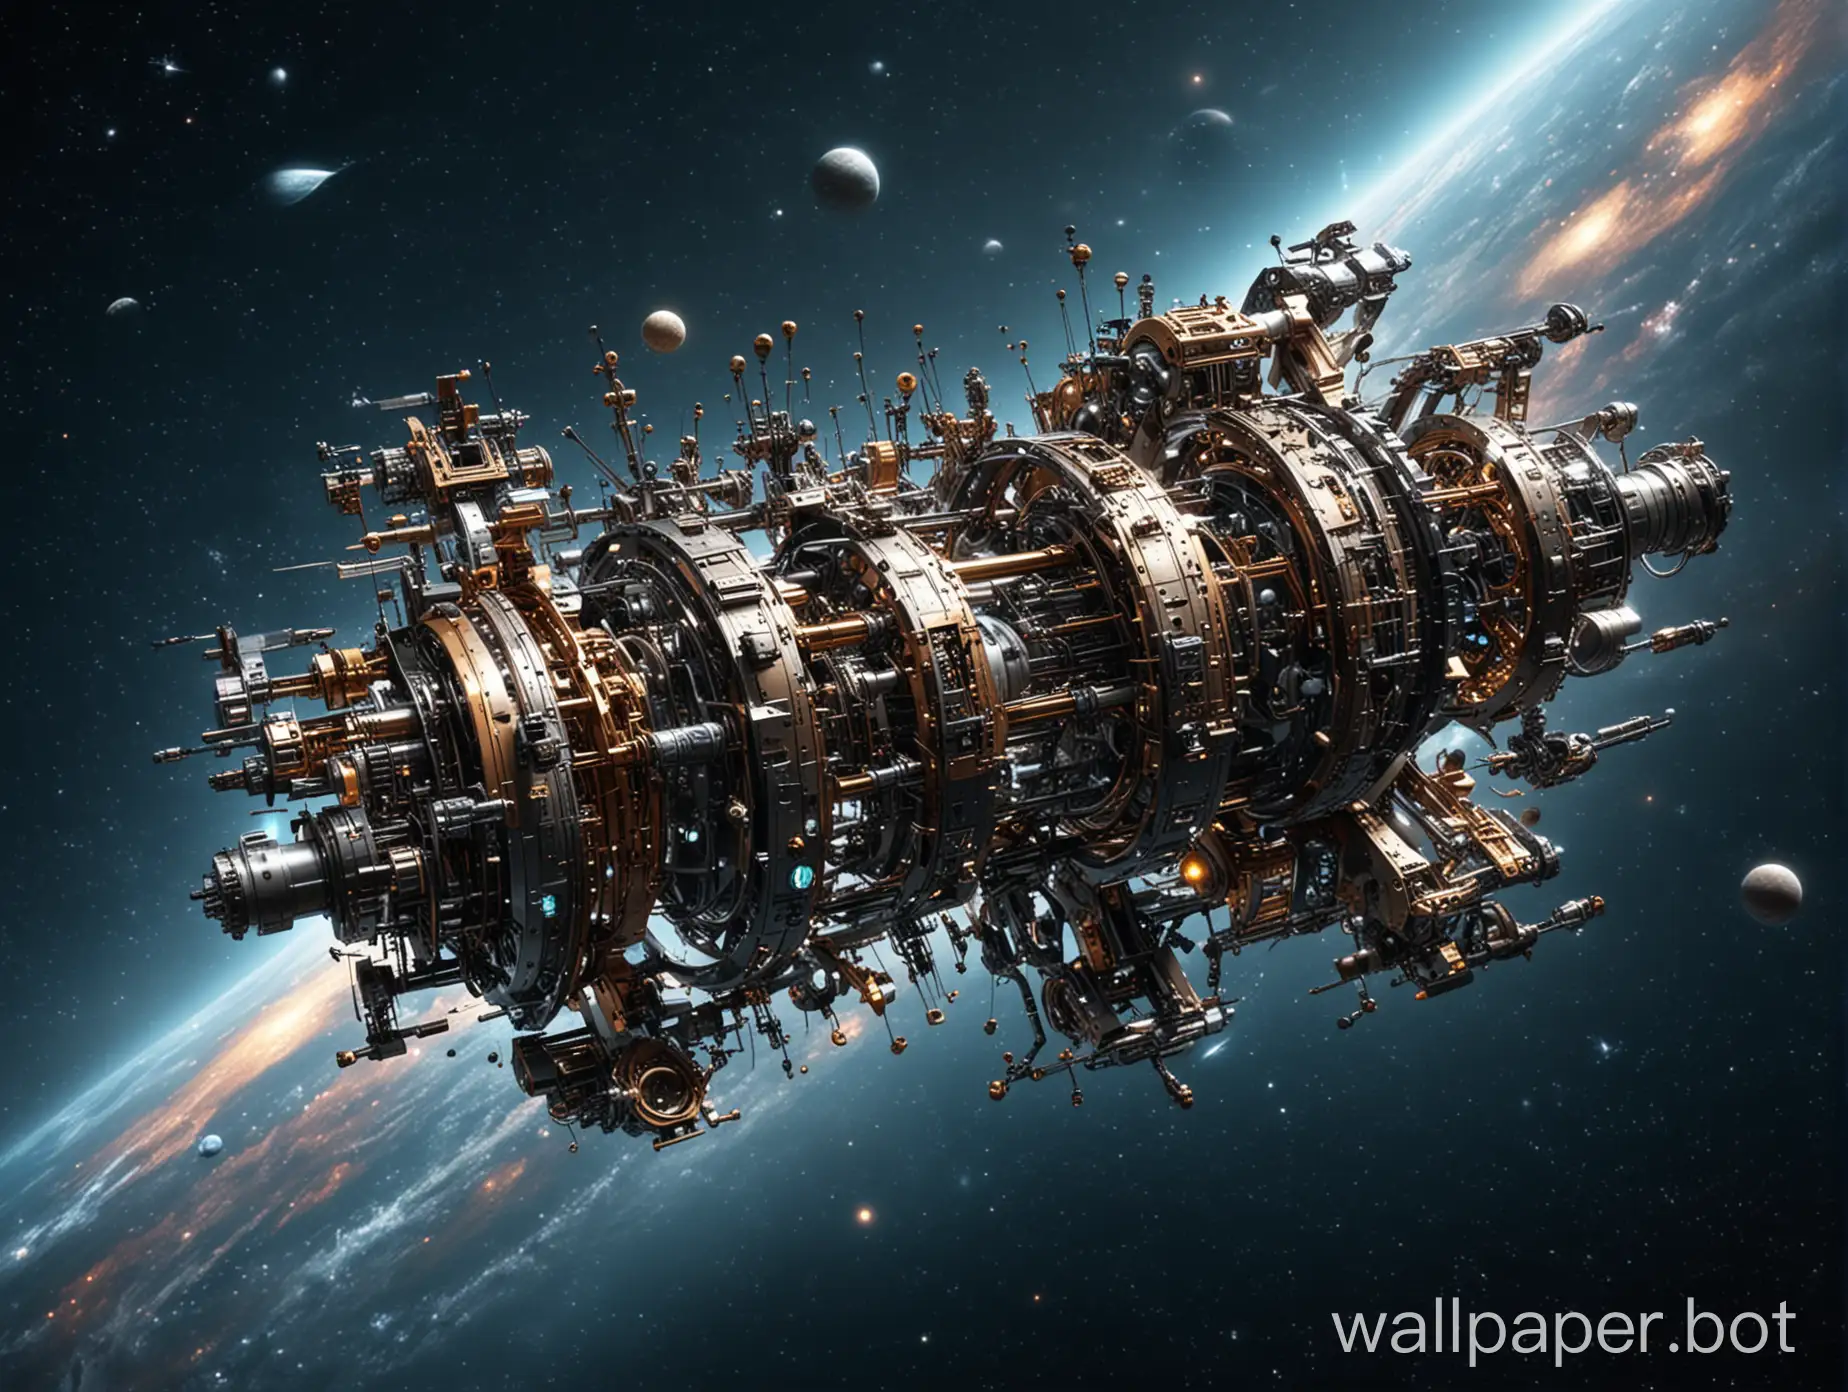 Futuristic-Space-Machinery-with-Dynamic-Shiny-Components